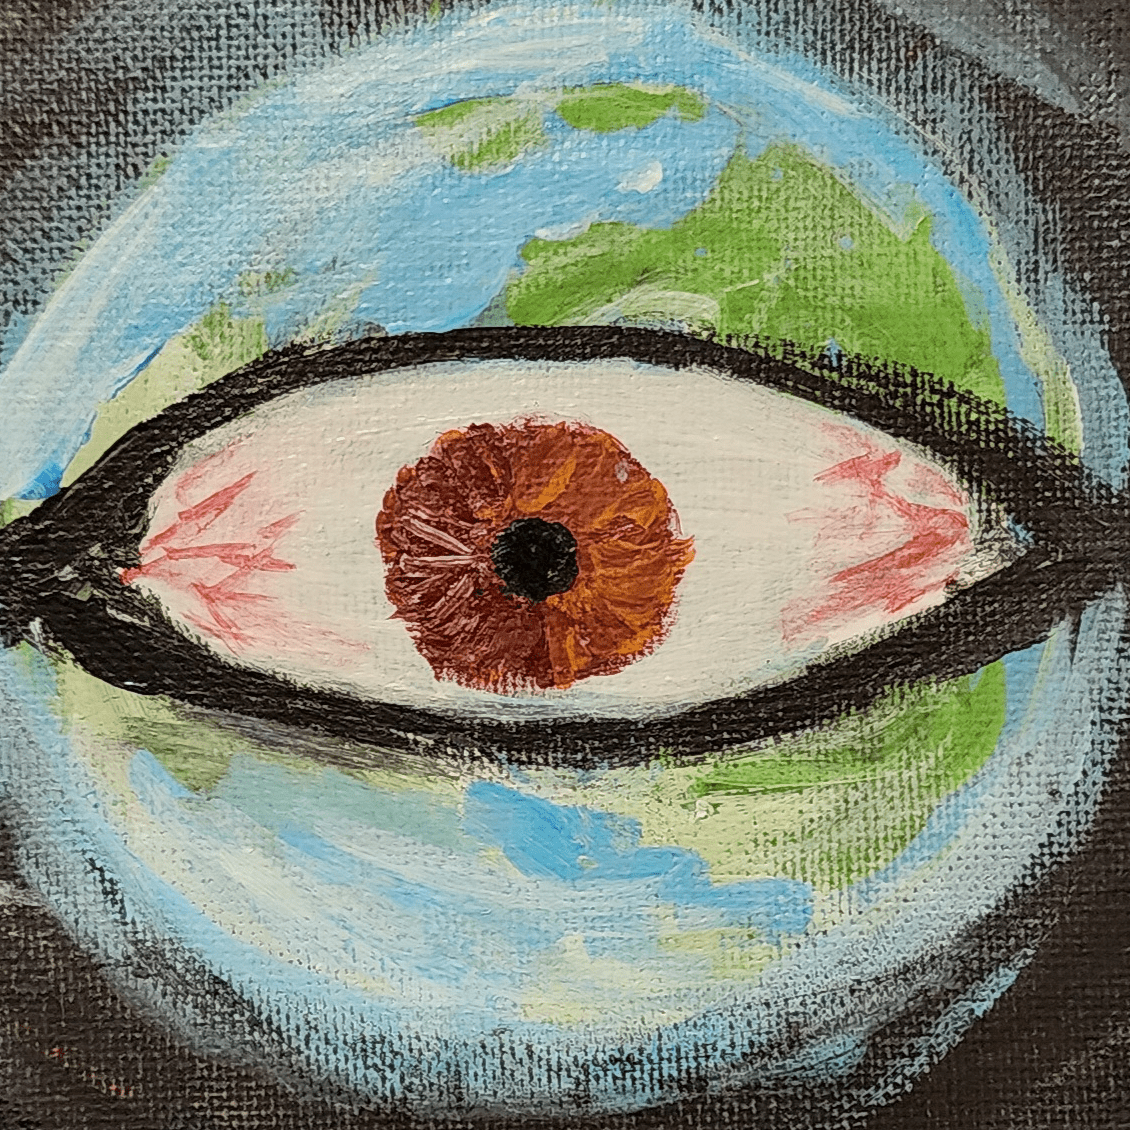 An illustration of the Earth with an eyeball at the center.